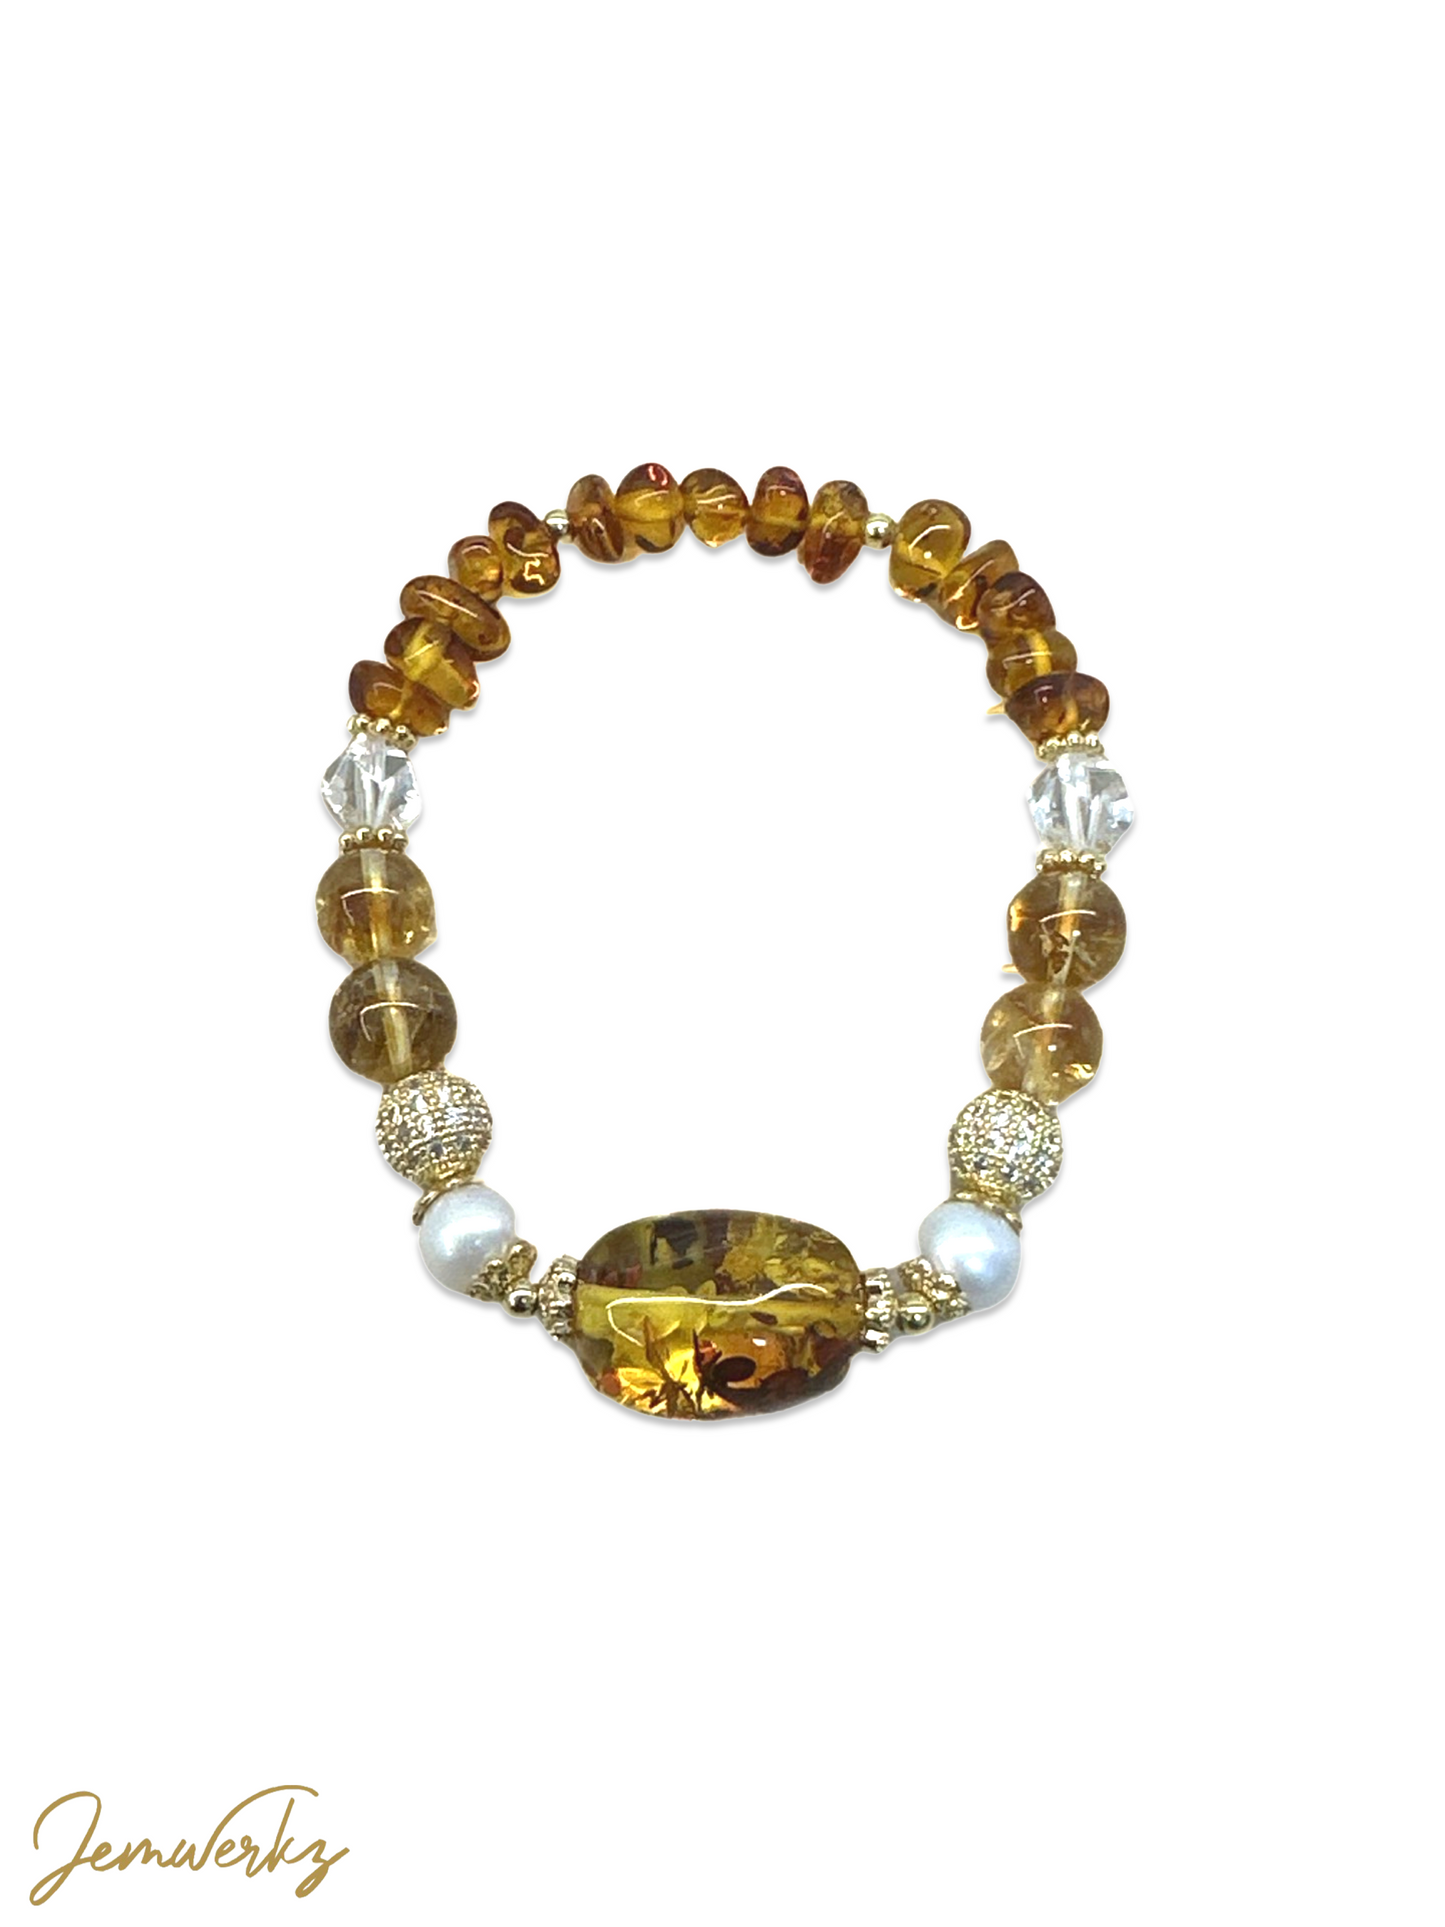 ASTRID - Flower Amber Freeform, Beads and Chips, Freshwater Pearls and Clear Quartz Bracelet